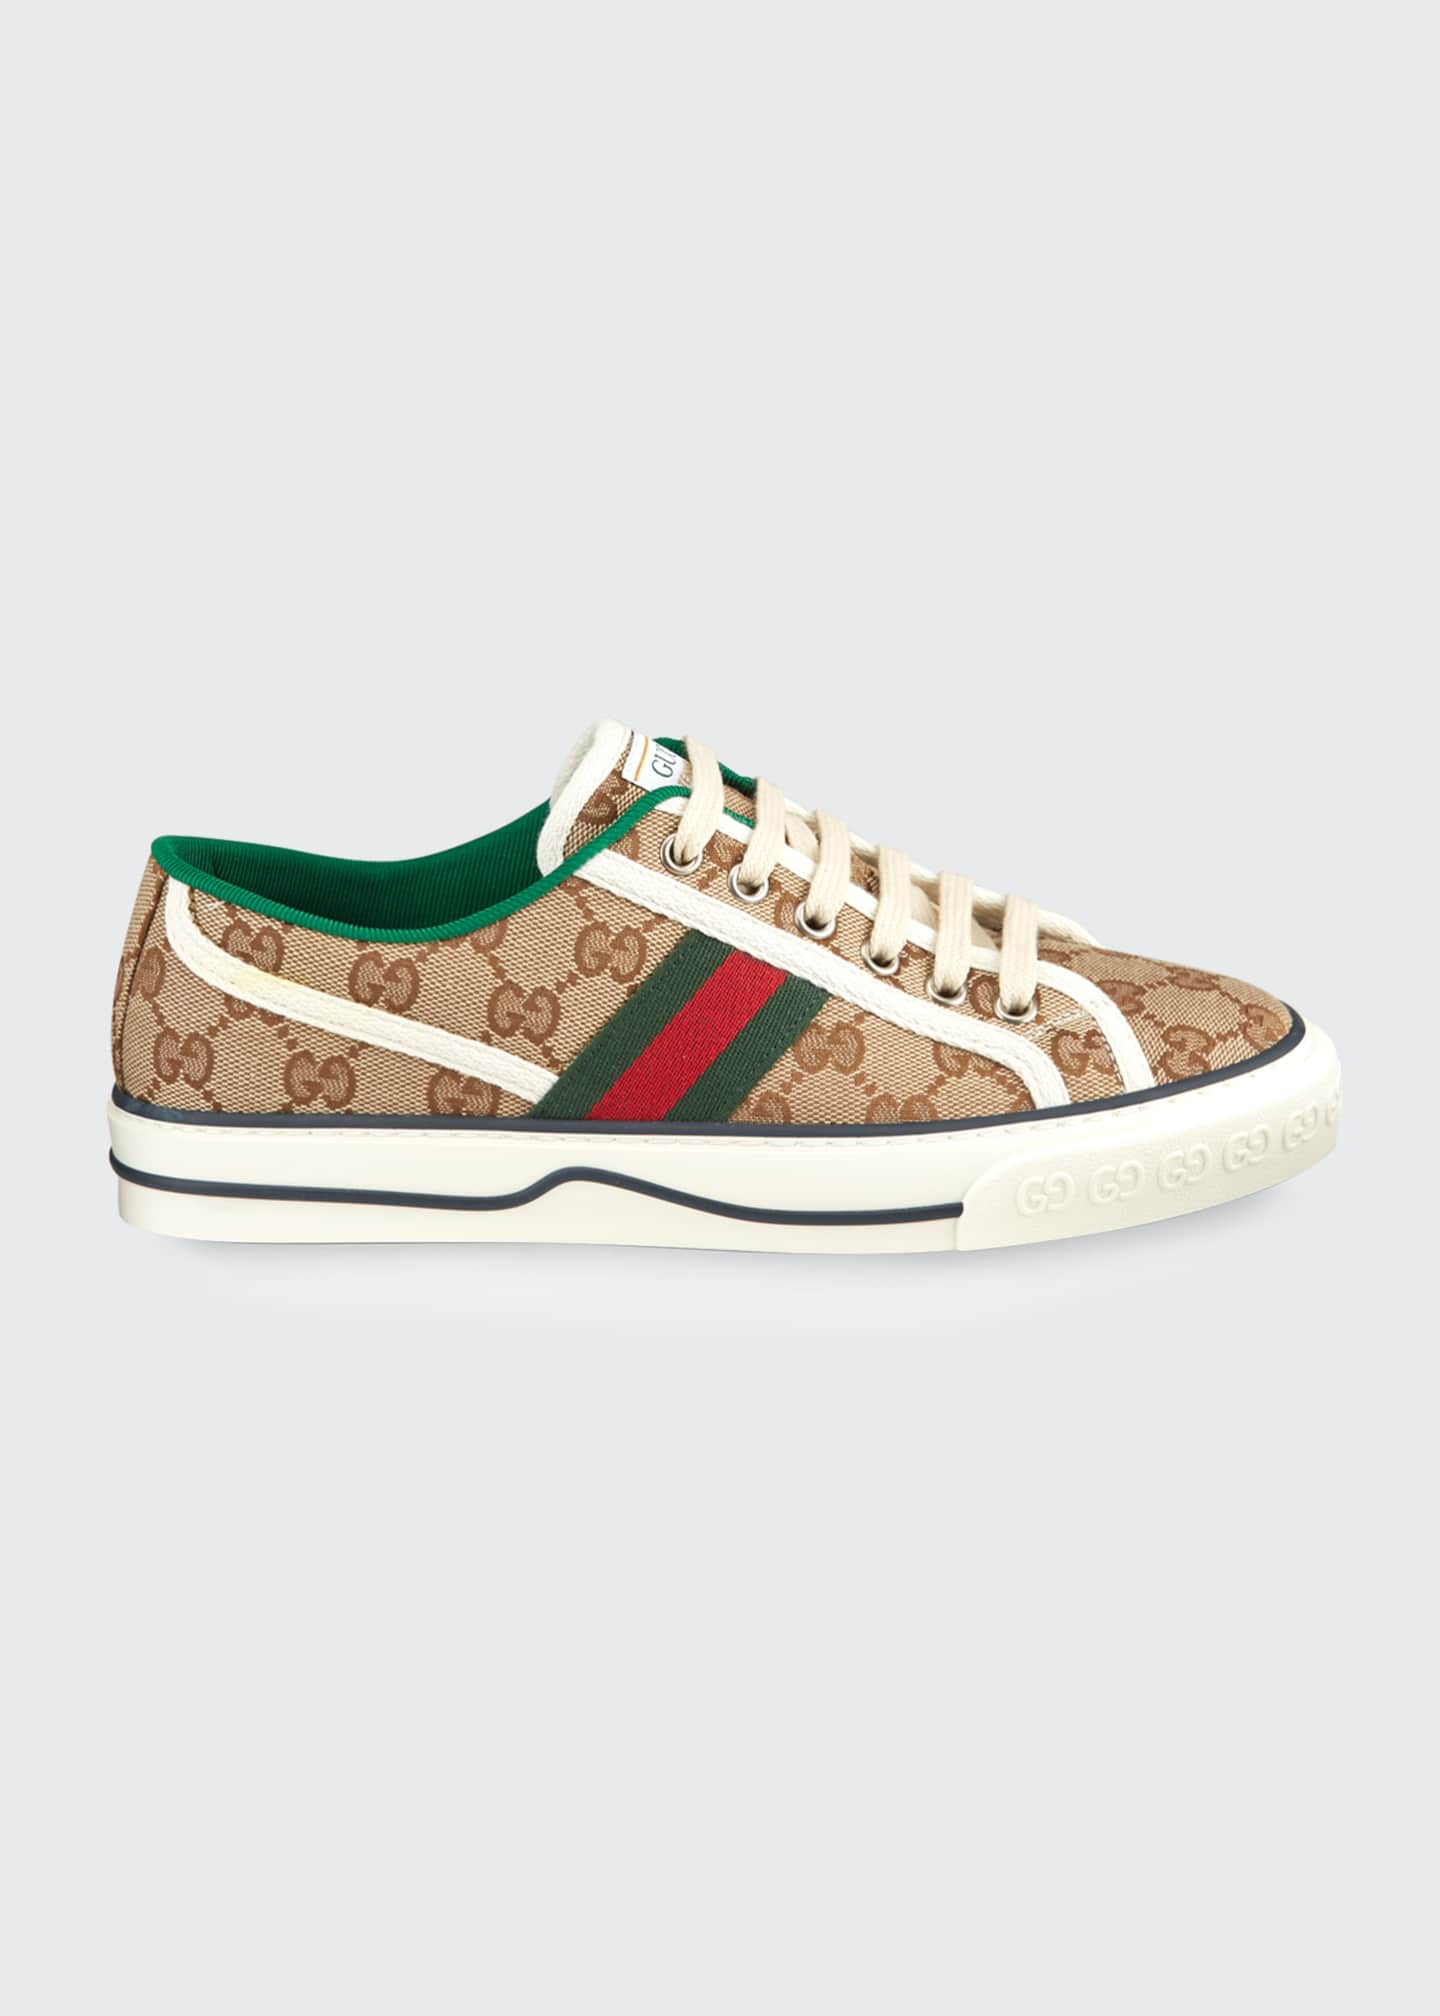 Gucci Gucci Tennis 1977 Sneakers Image 1 of 4